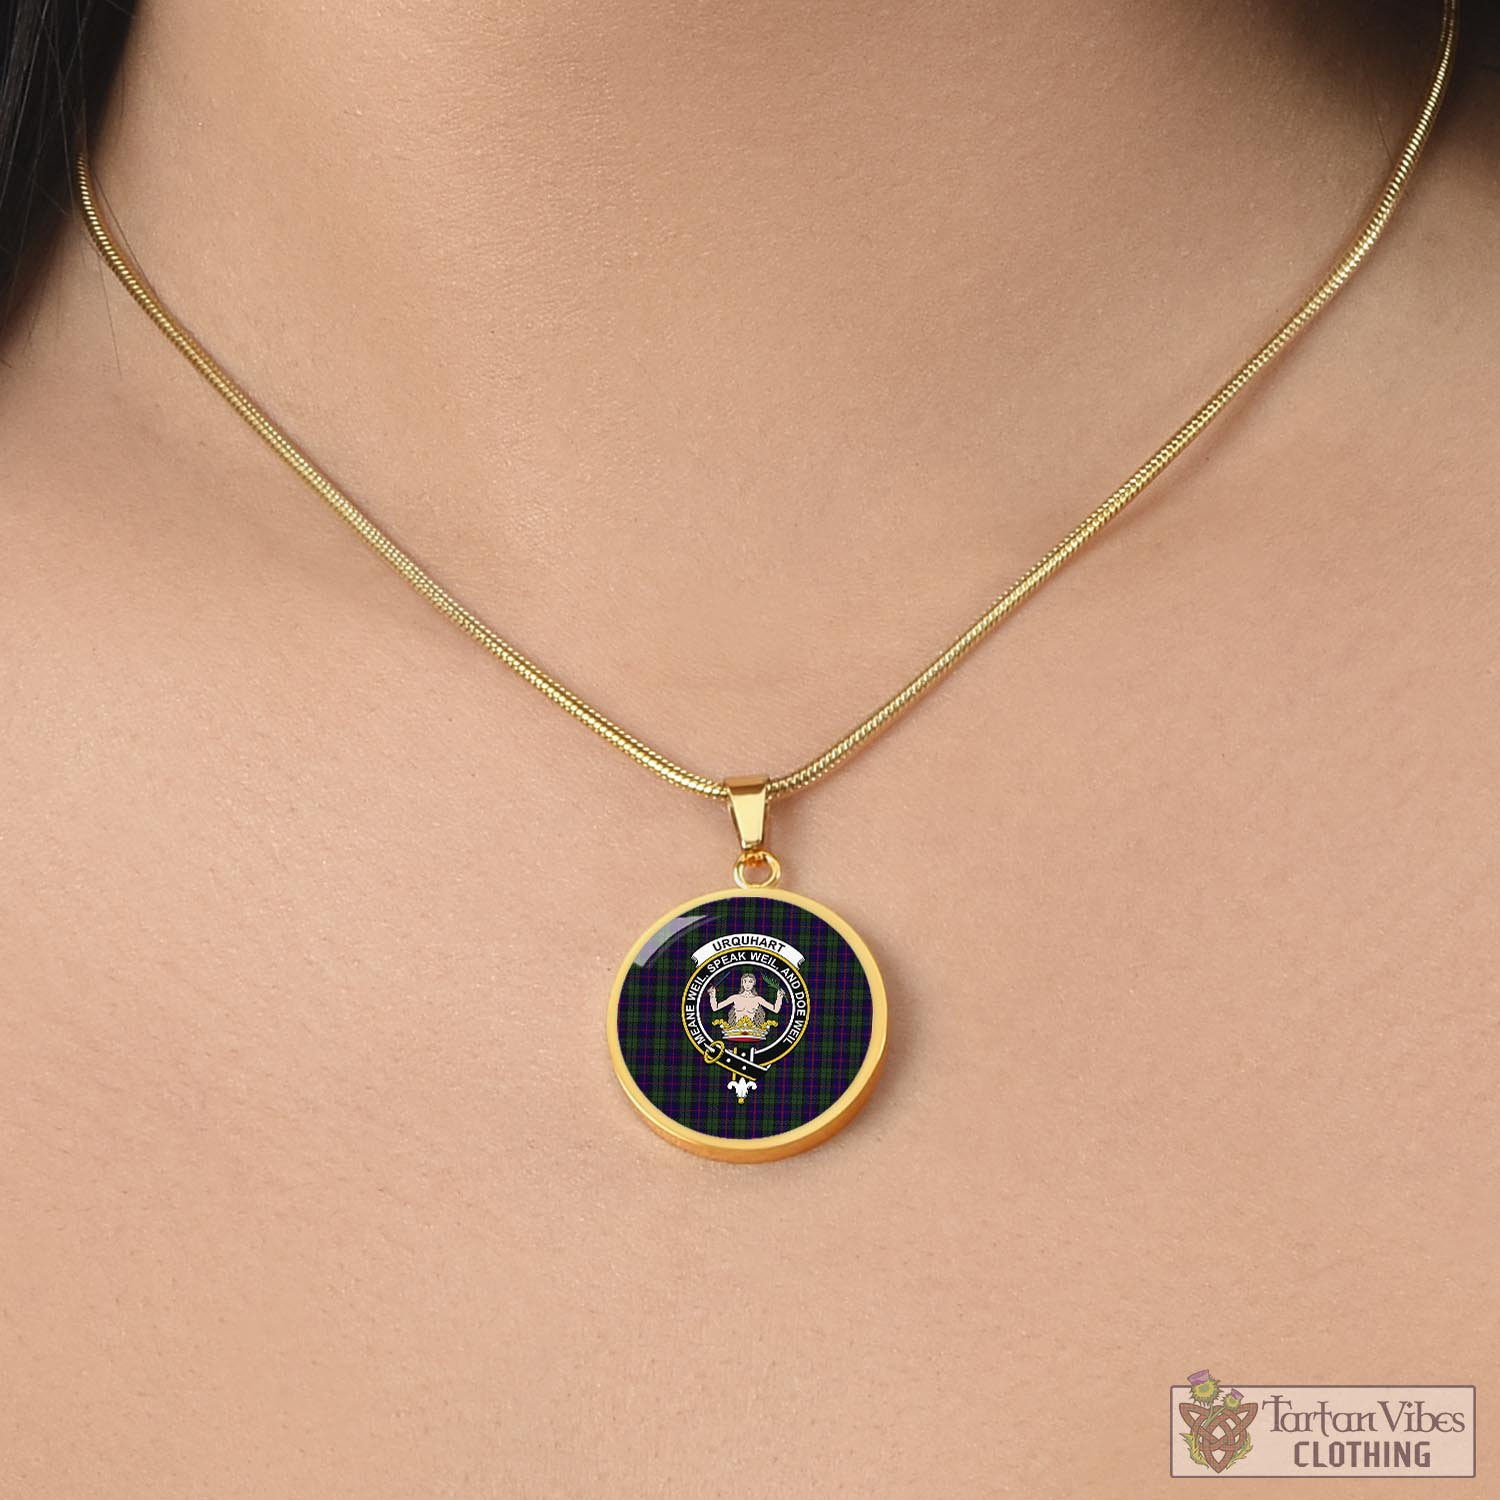 Tartan Vibes Clothing Urquhart Tartan Circle Necklace with Family Crest